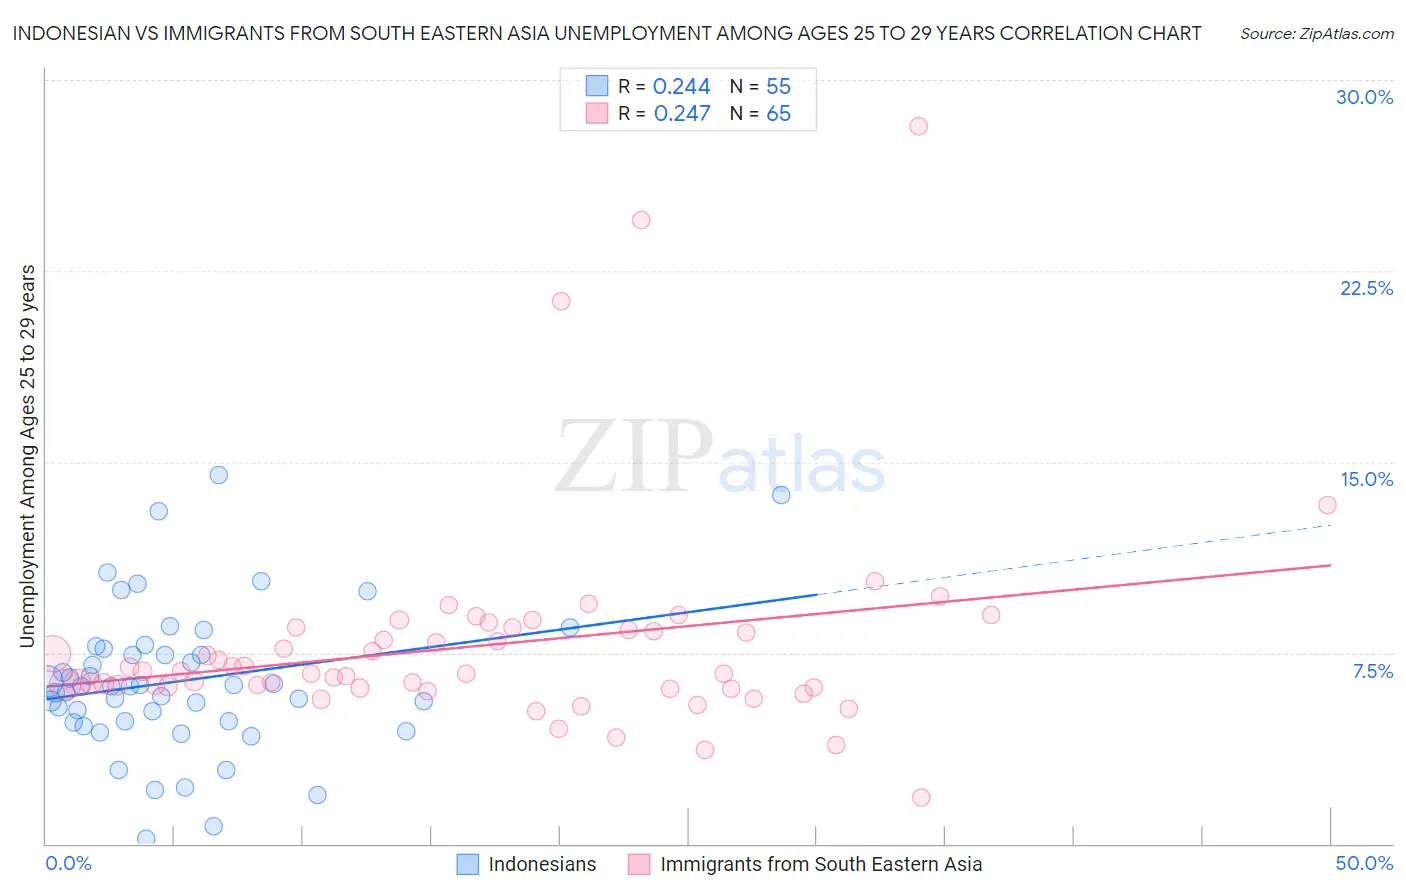 Indonesian vs Immigrants from South Eastern Asia Unemployment Among Ages 25 to 29 years